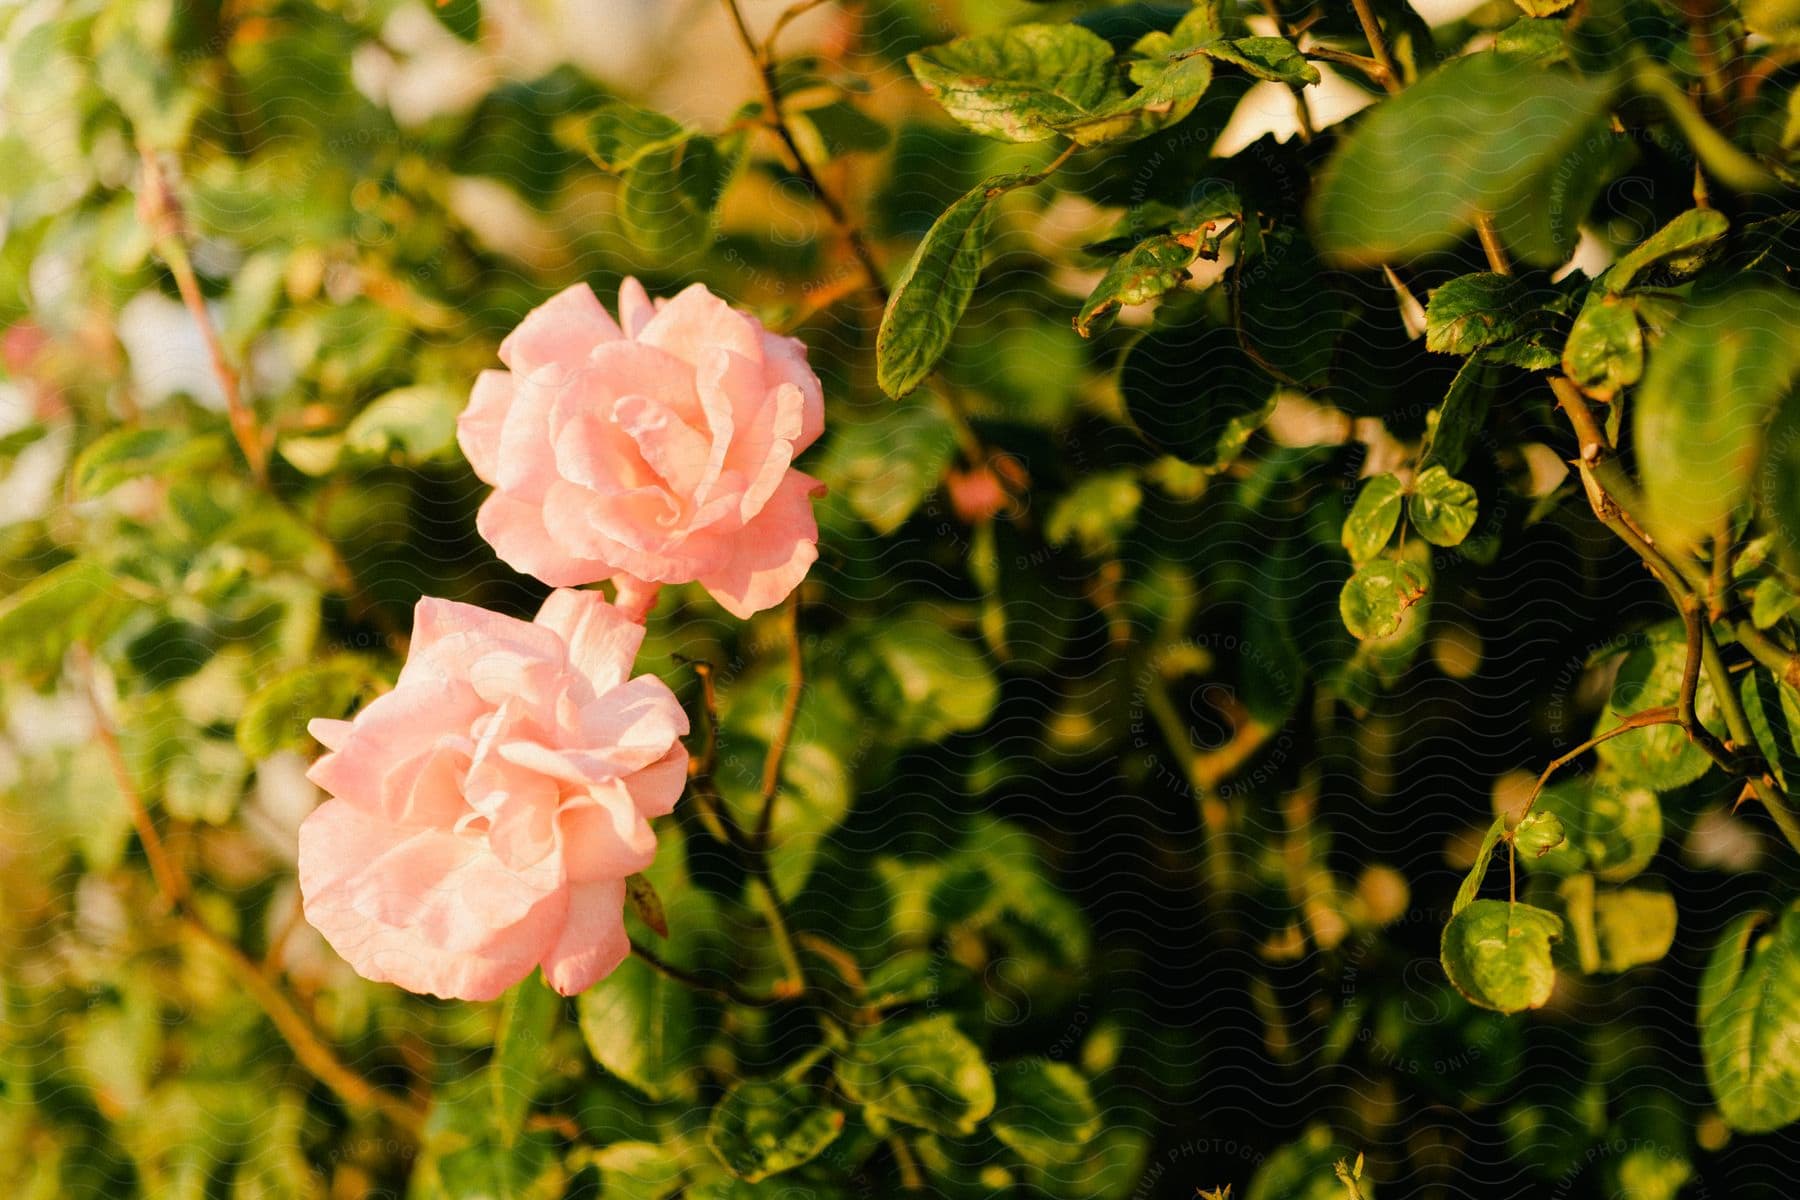 Two pink roses in bloom, with green leaves in the background, illuminated by warm light.